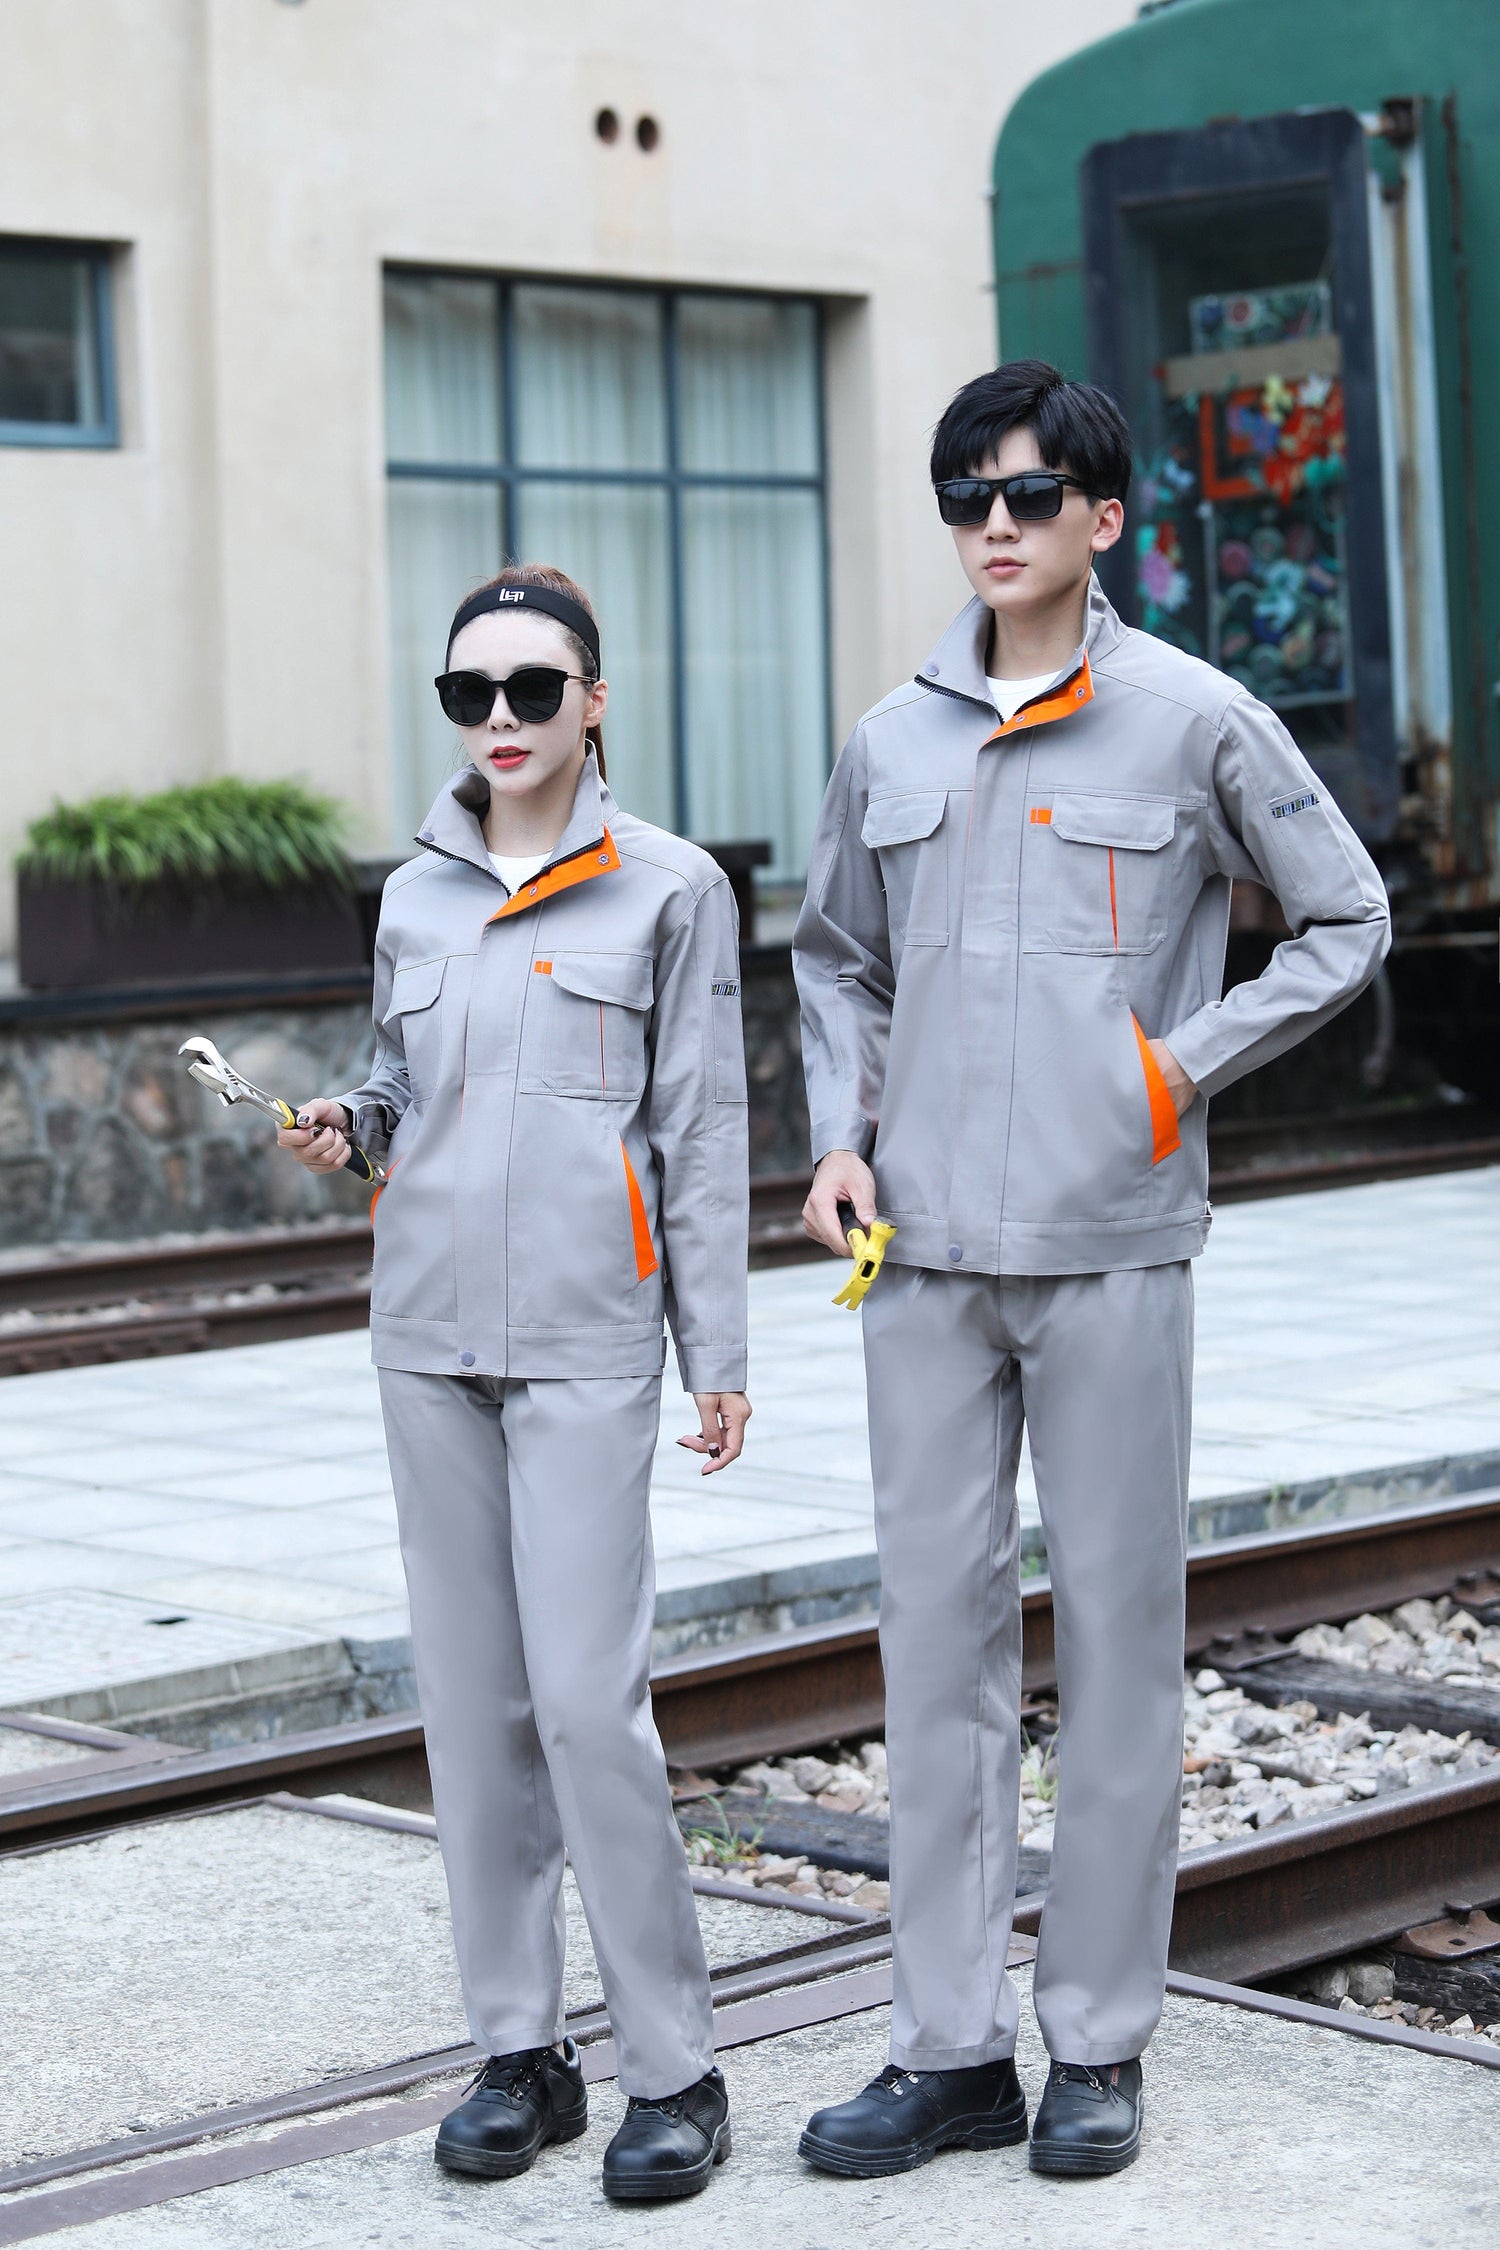 Corals Trading Co. 可樂思百貨商行 纯棉 Autumn and winter long-sleeved pure cotton series workwear SD-PC-W803